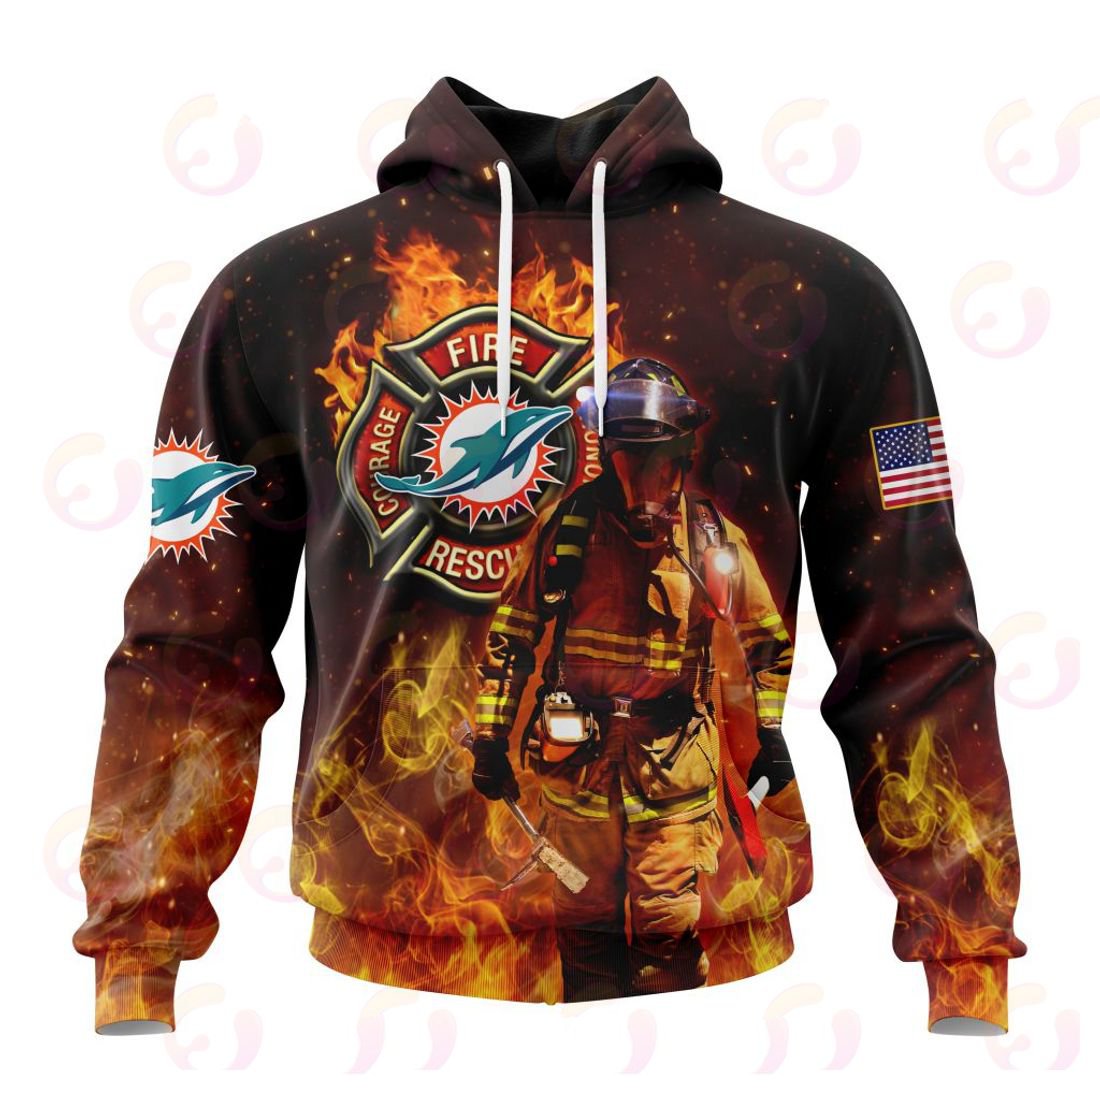 MIAMI DOLPHINS HONOR FIREFIGHTERS – FIRST RESPONDERS 3D HOODIE